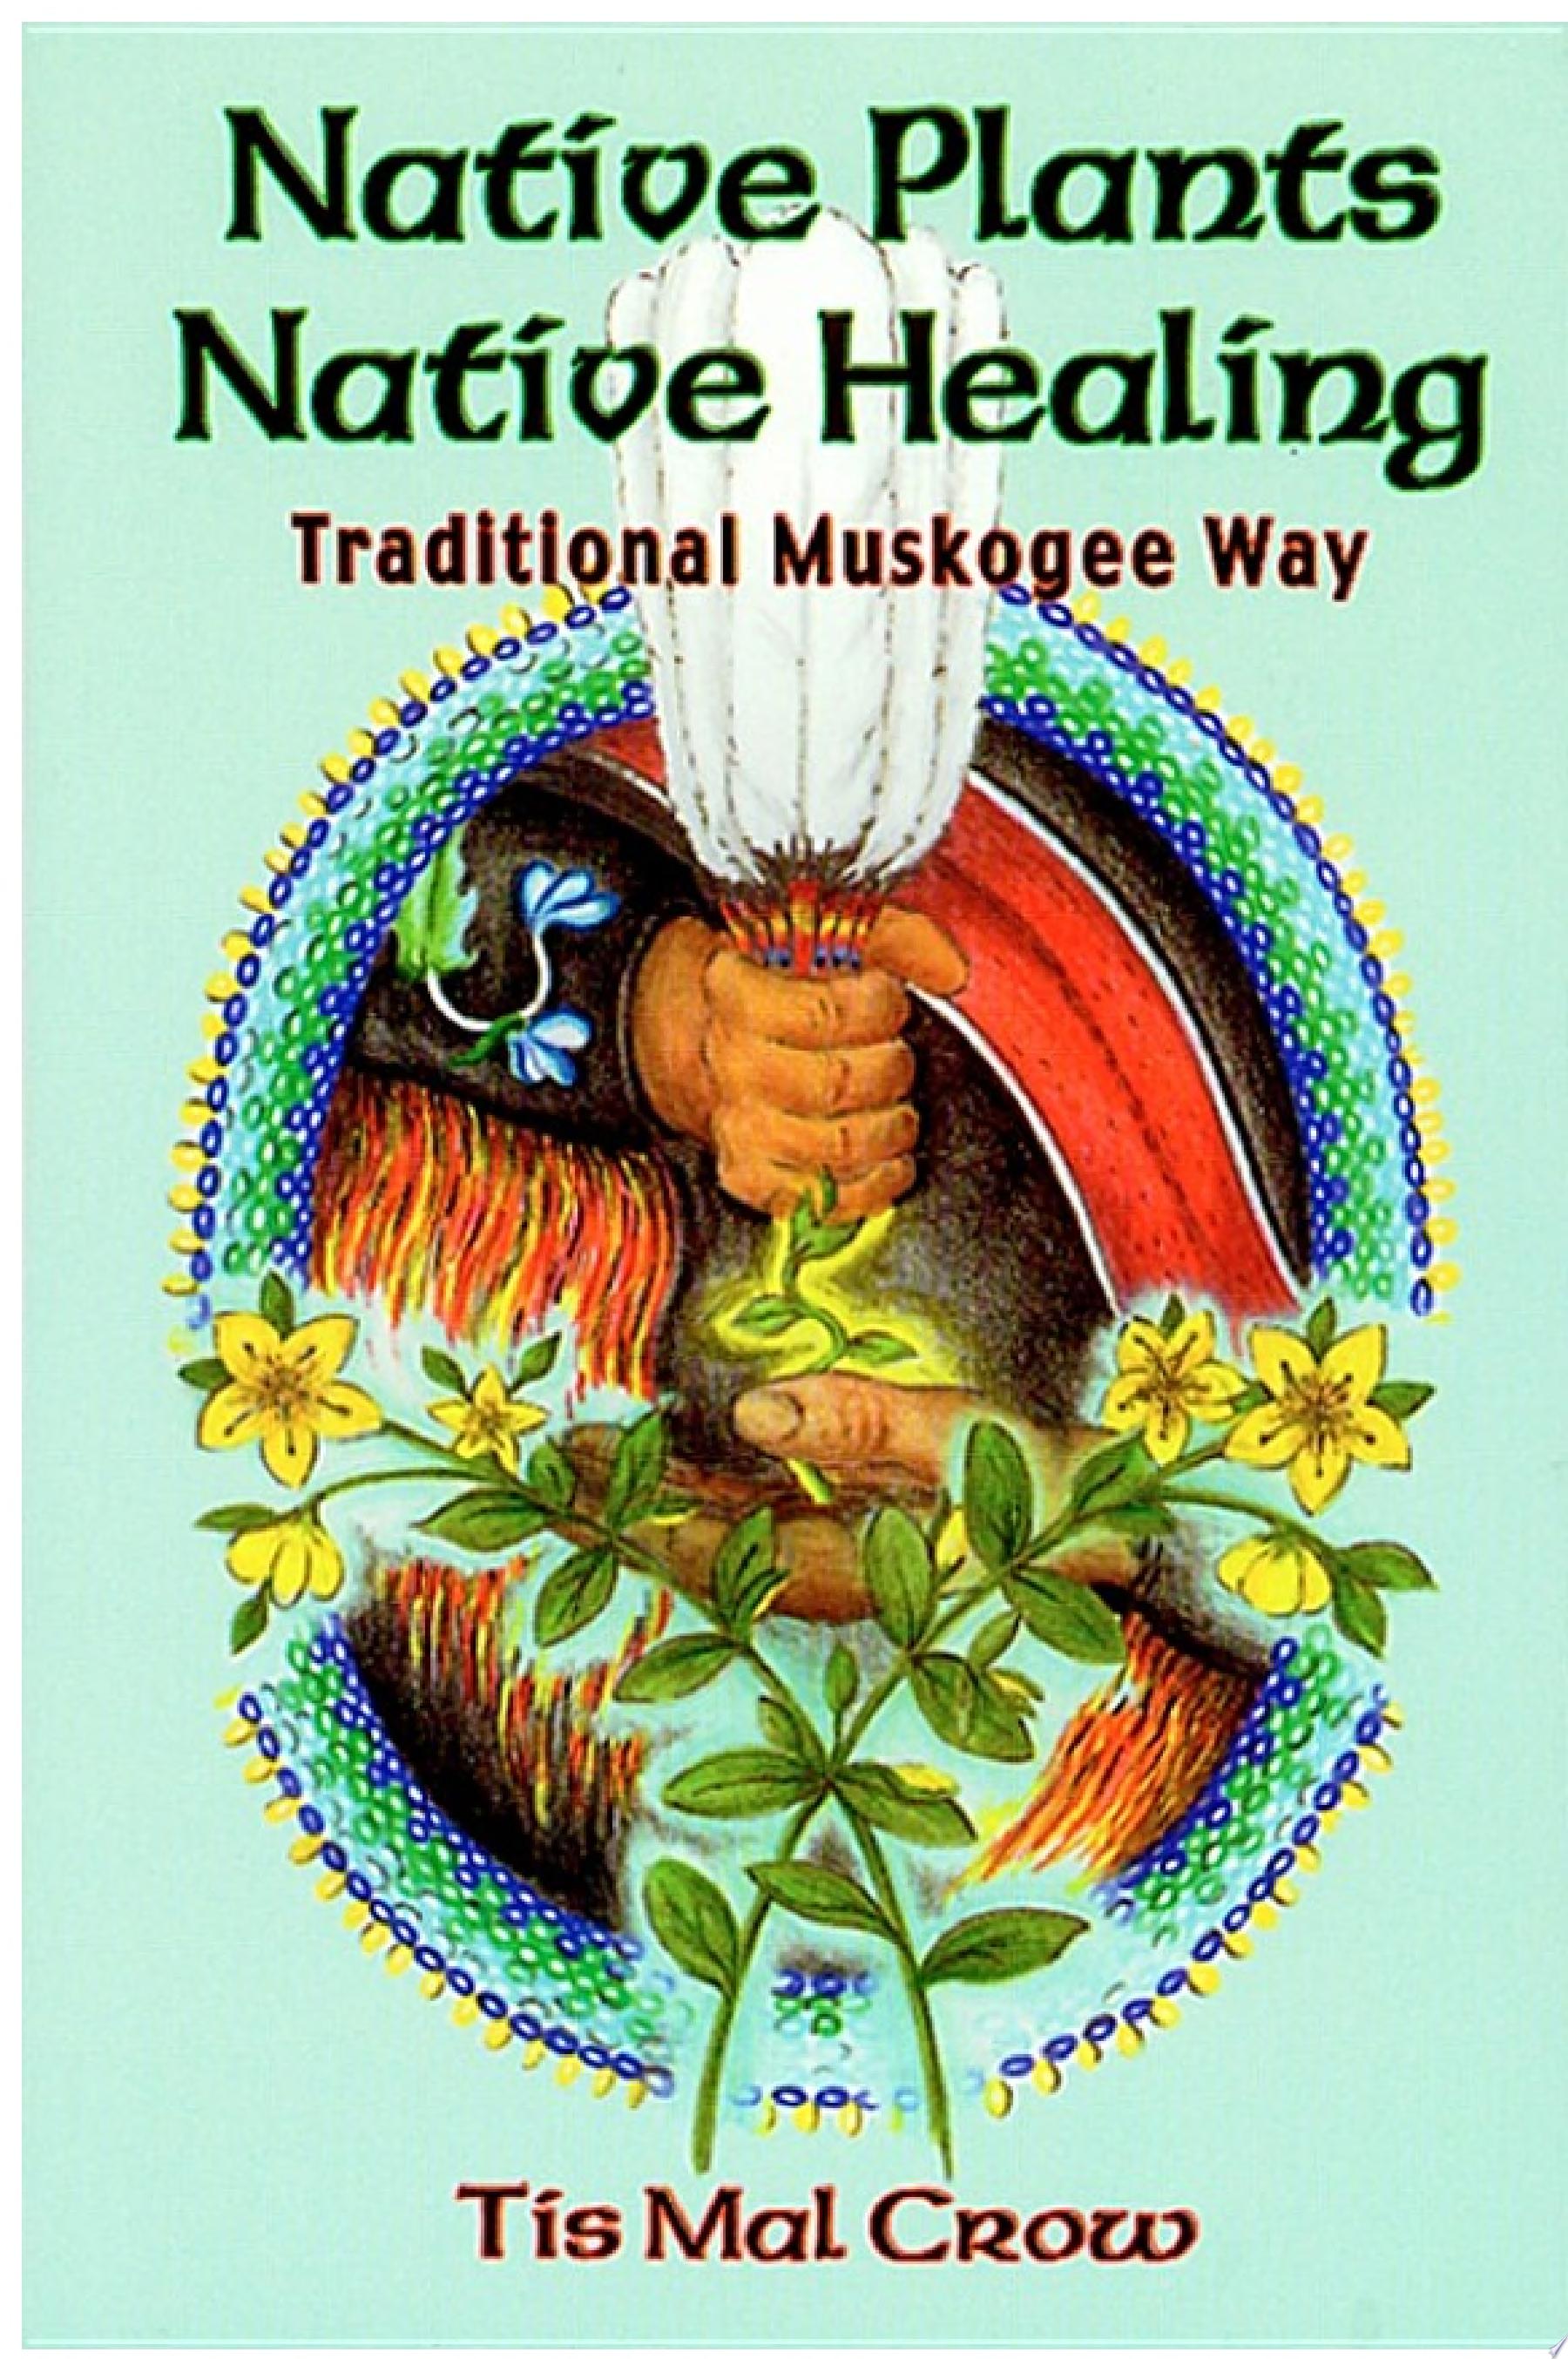 Image for "Native Plants, Native Healing"